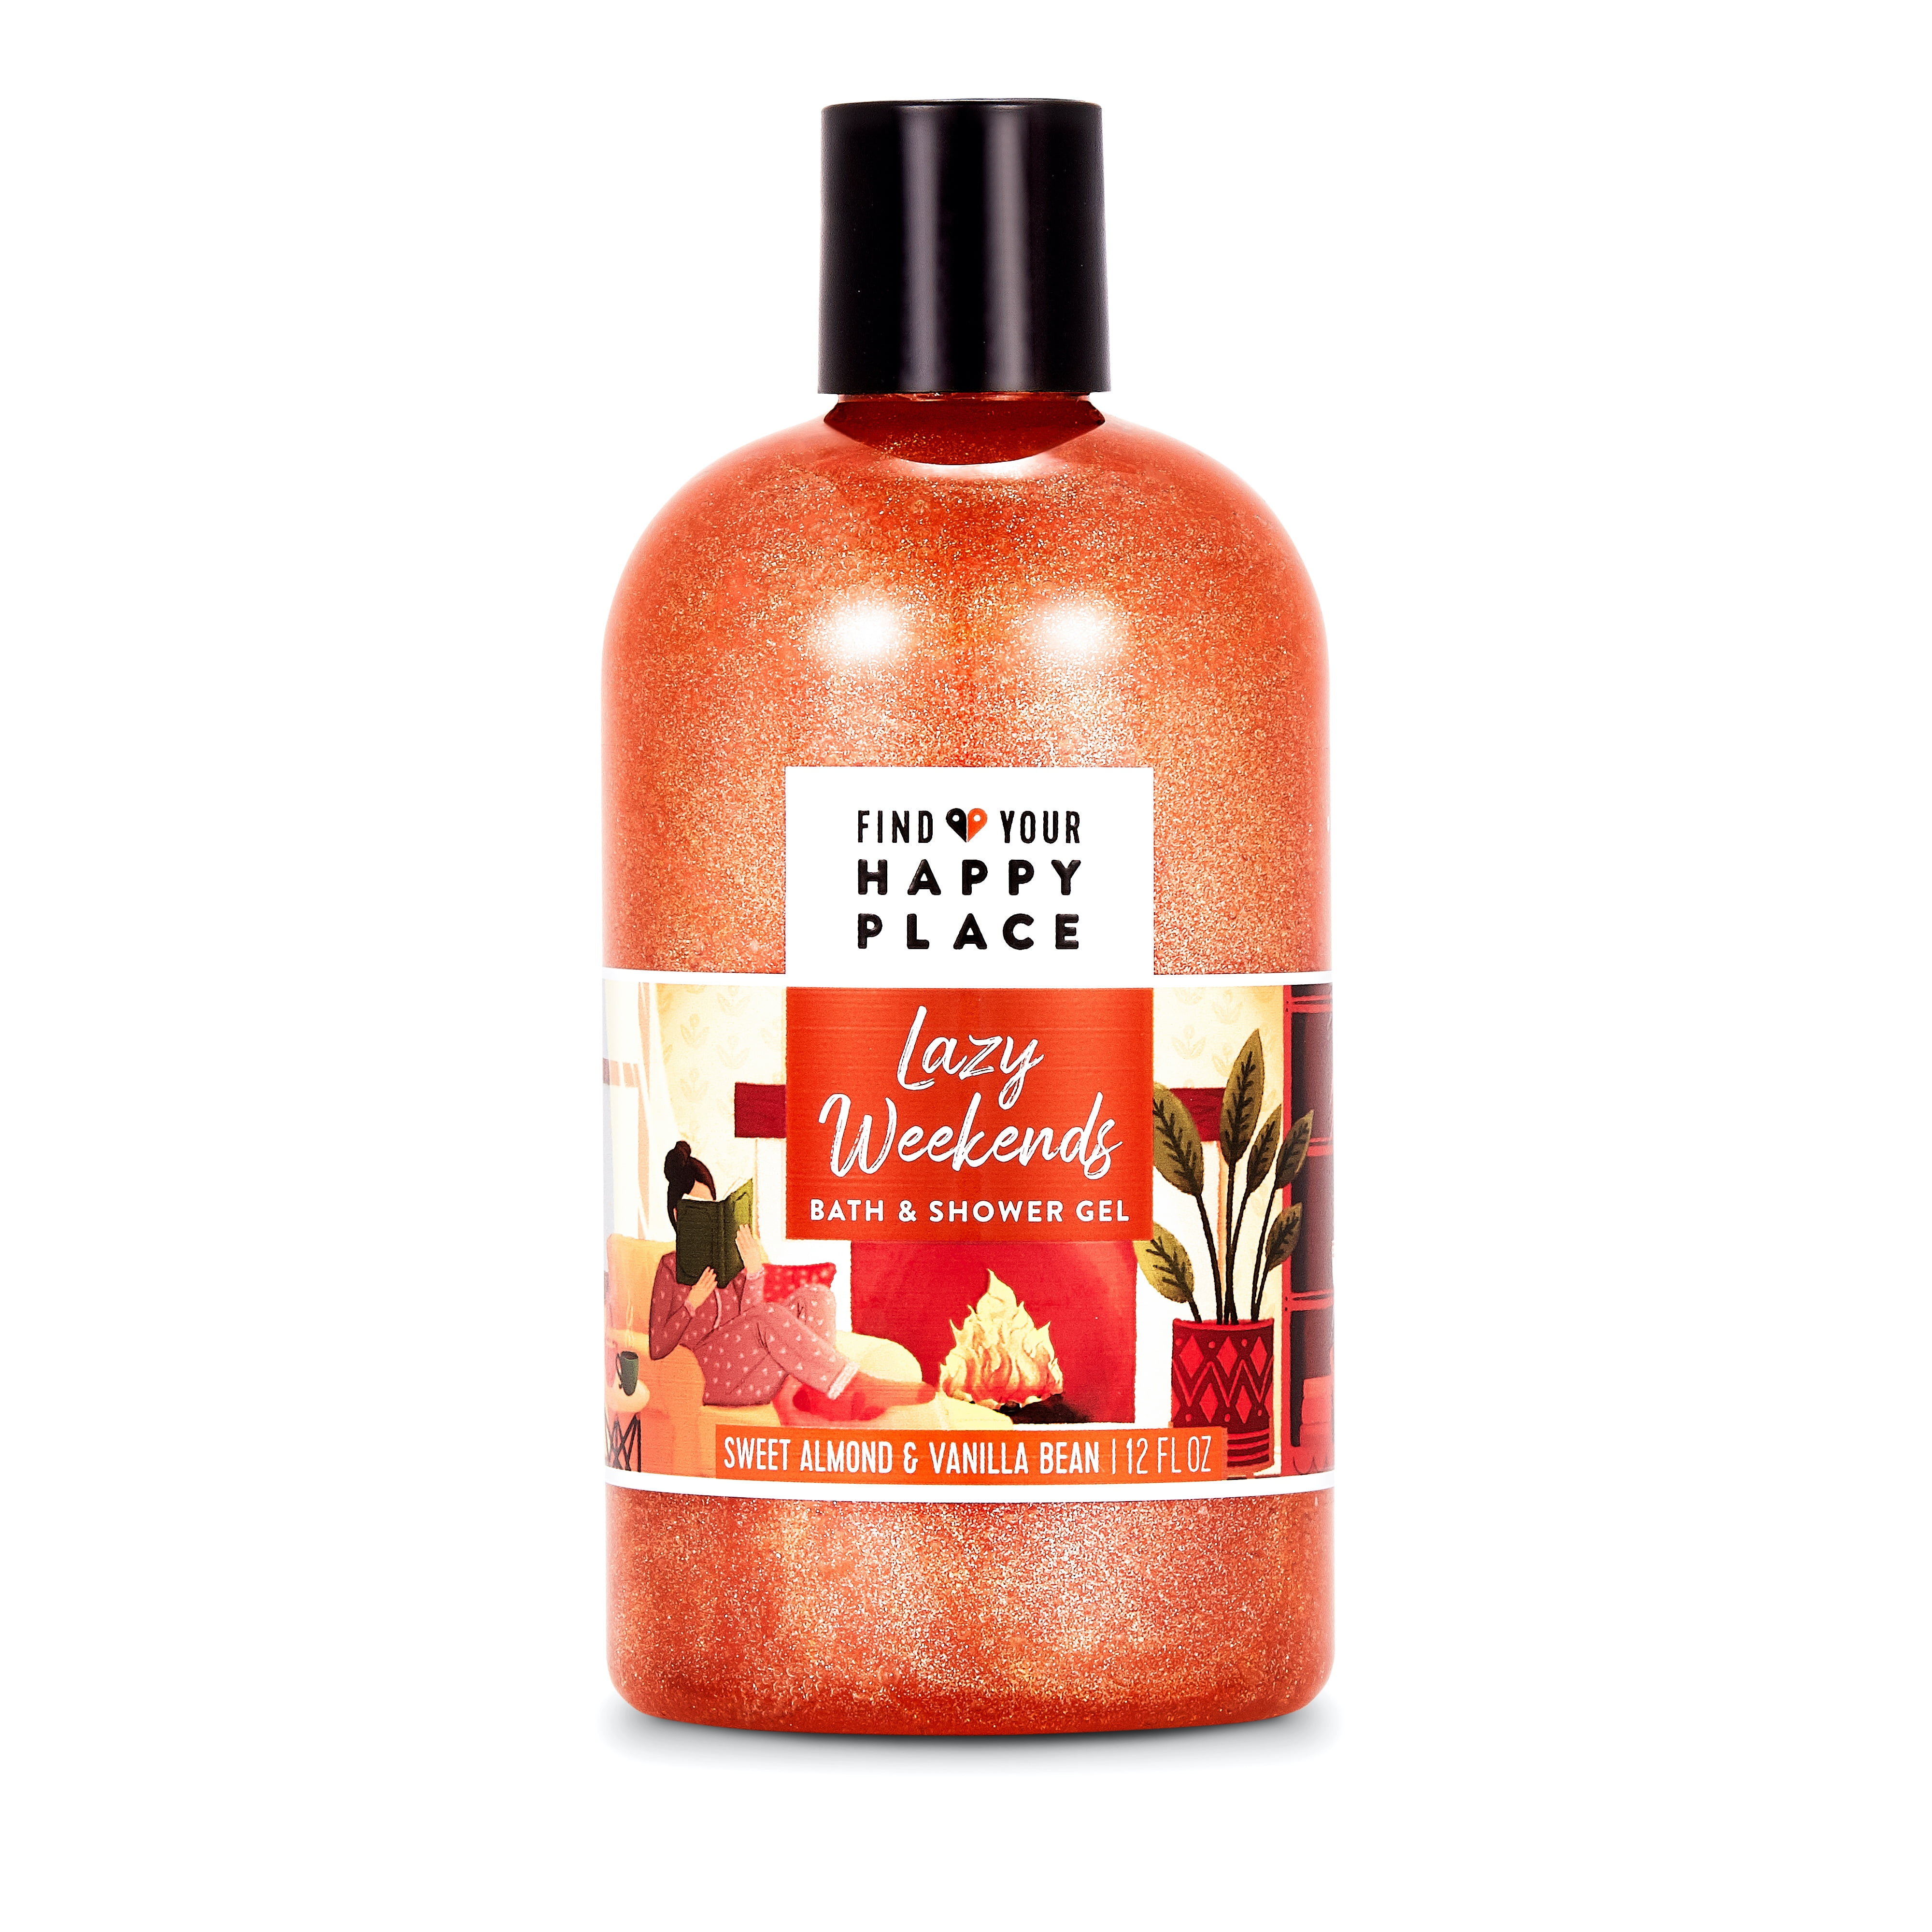 Find Your Happy Place Indulgent Bubble Bath And Shower Gel, Lazy Weekends Sweet Almond And Vanilla Bean 12 fl oz